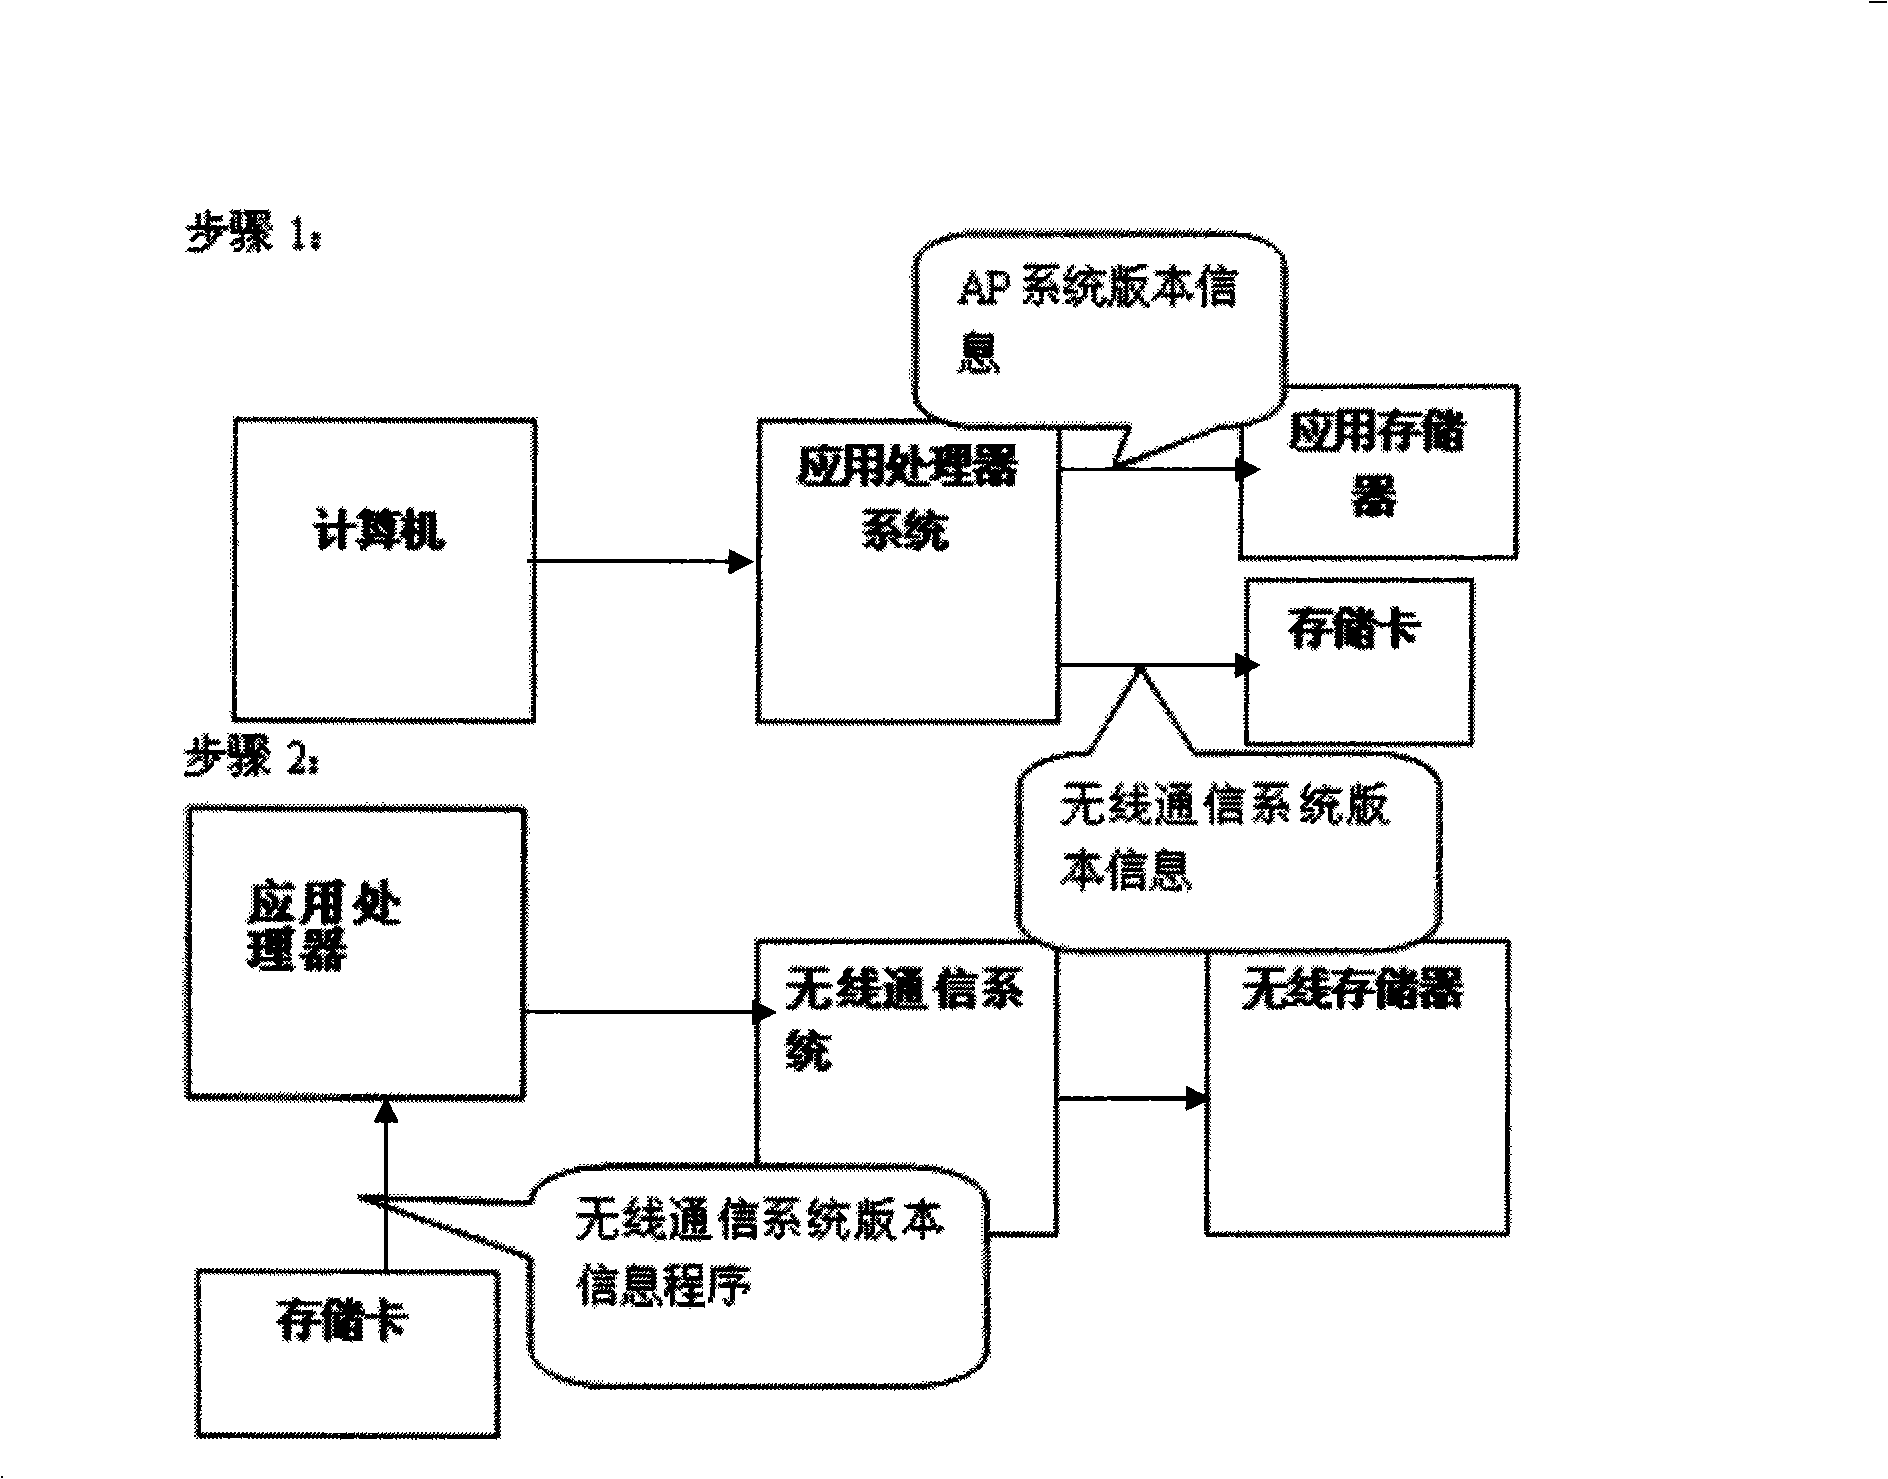 Communicating method between computer and intelligent mobile terminal based on AP architecture